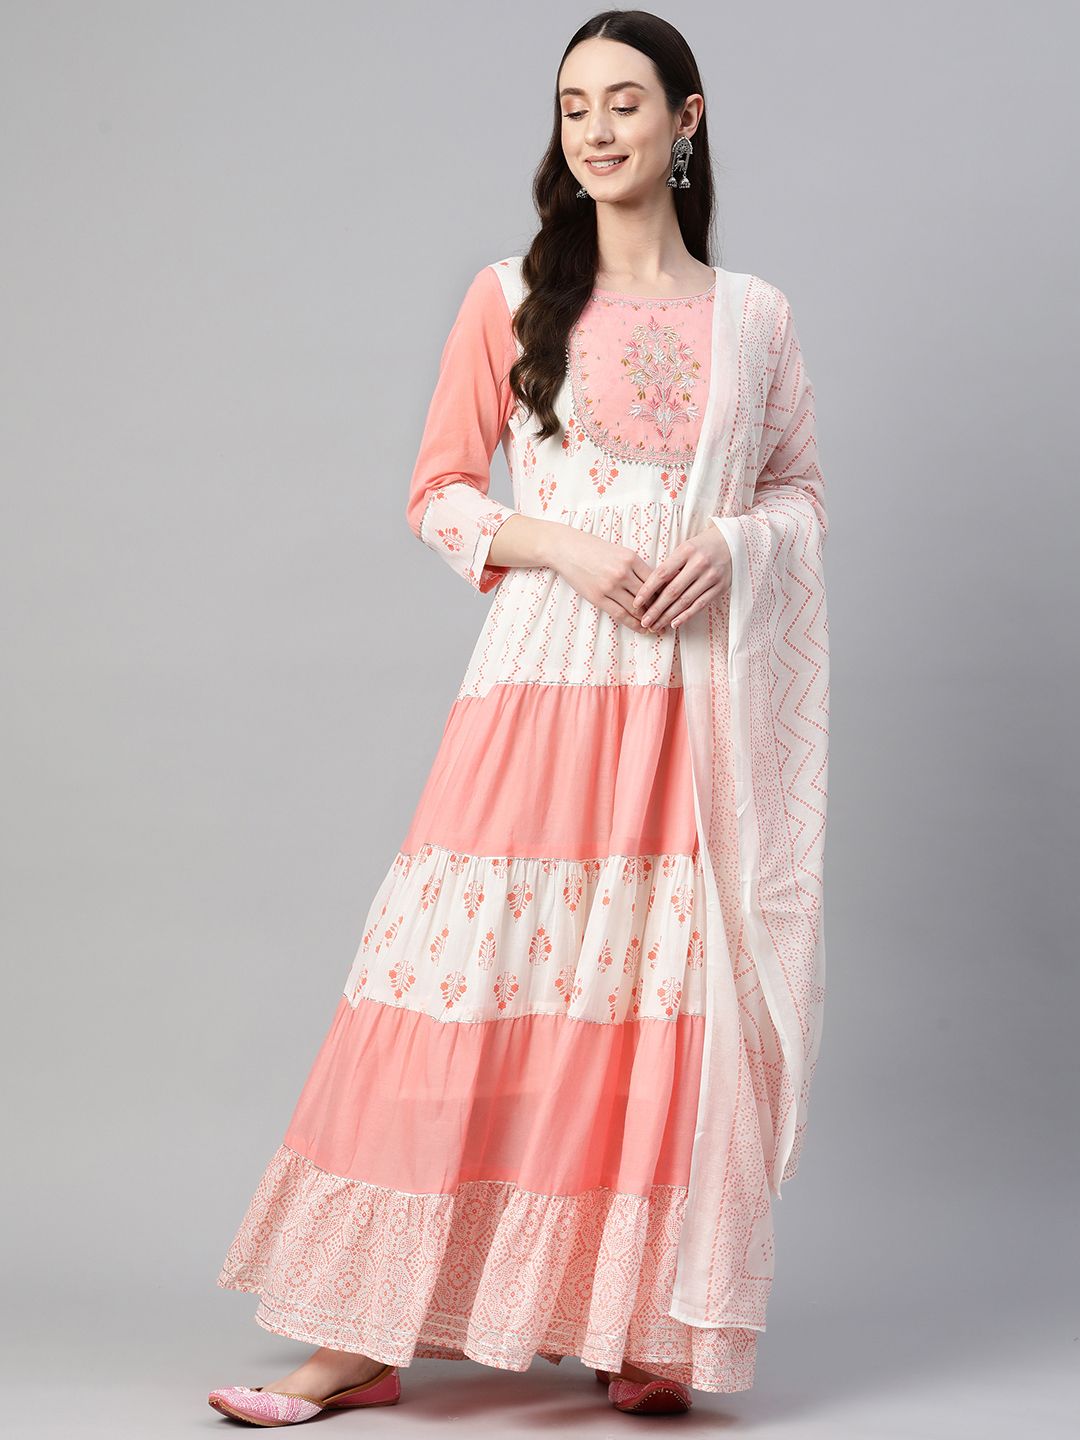 Readiprint Fashions Floral Embroidered Cotton Ethnic Maxi Dress Price in India